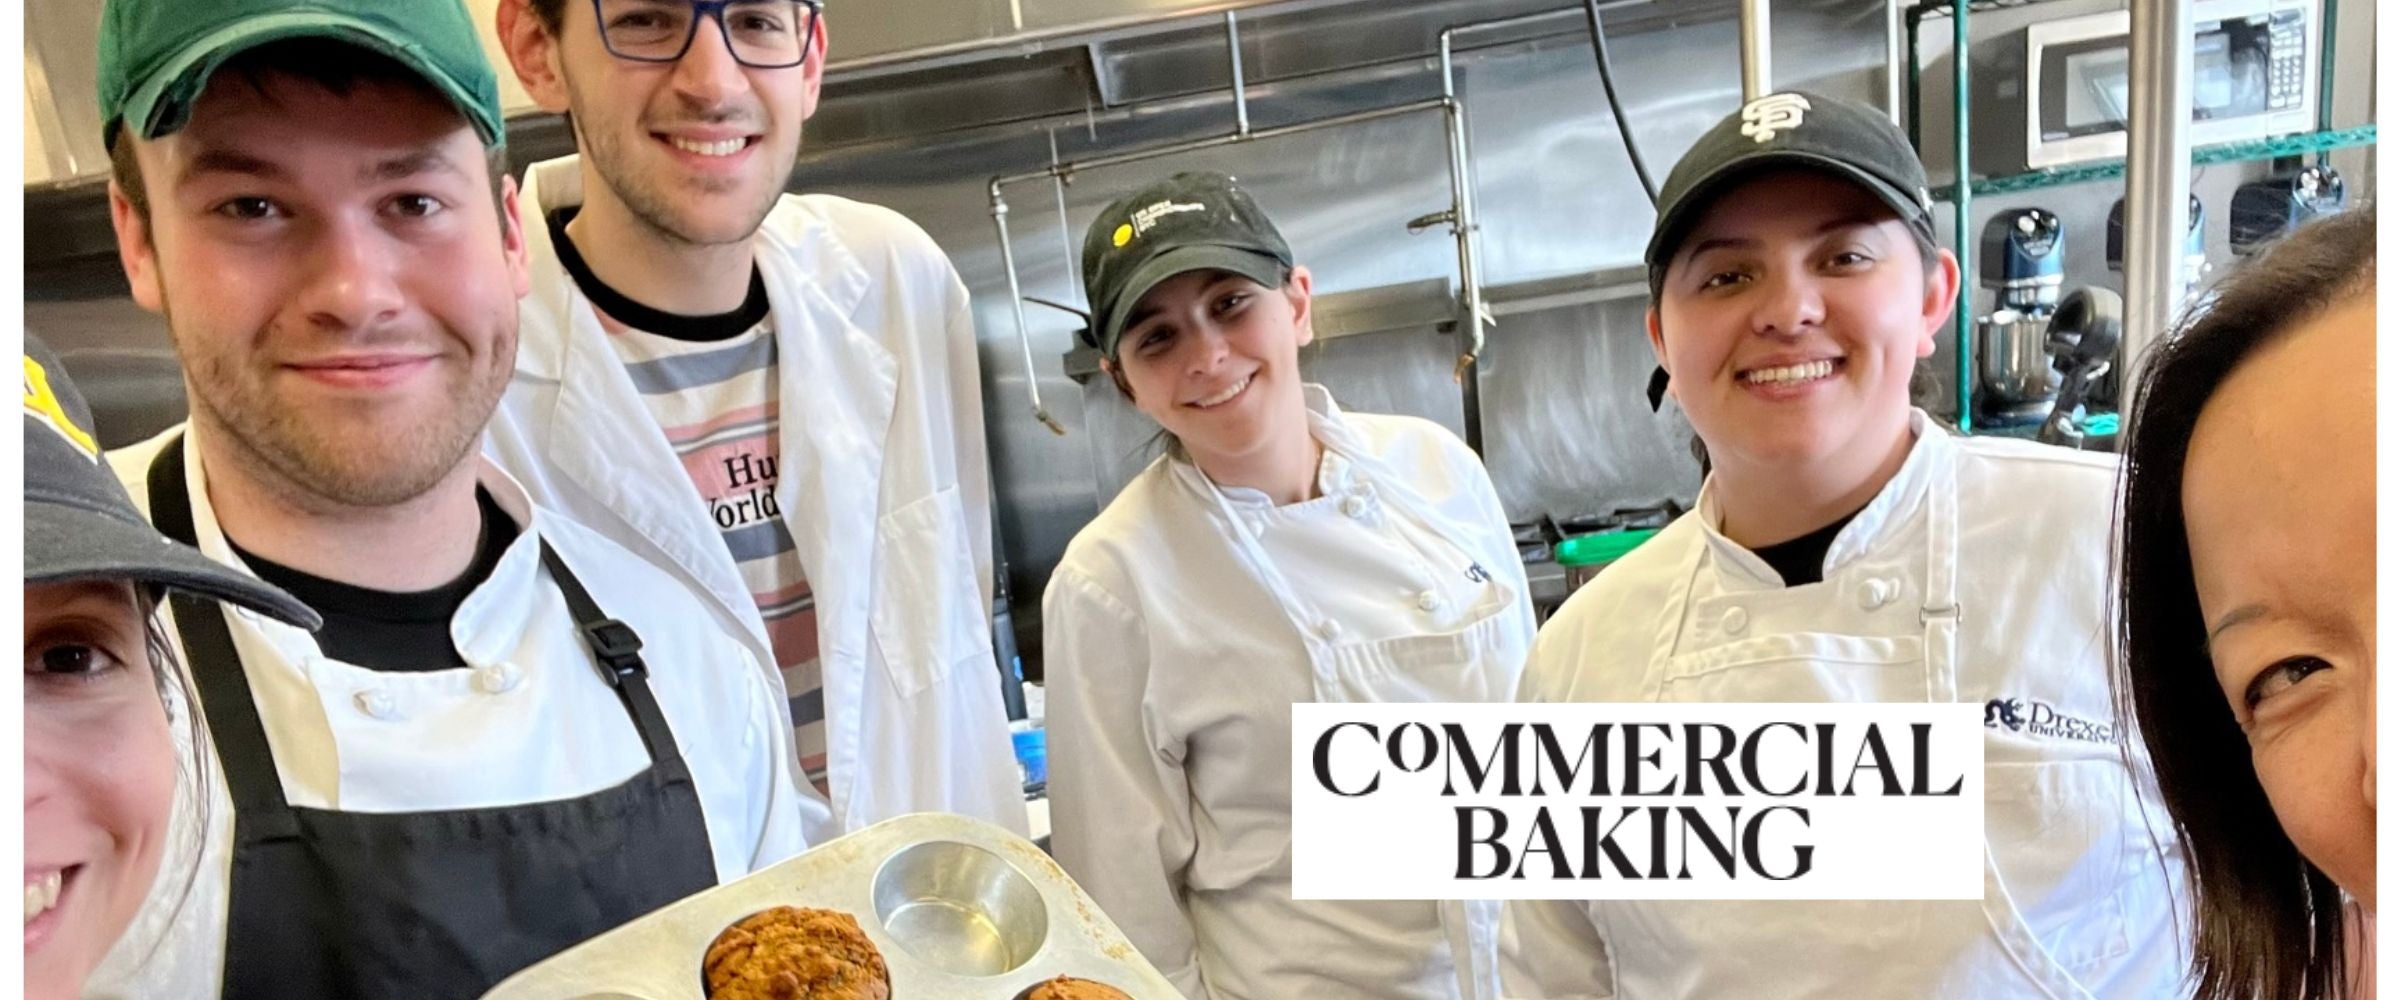 Mutually Beneficial - Commercial Baking